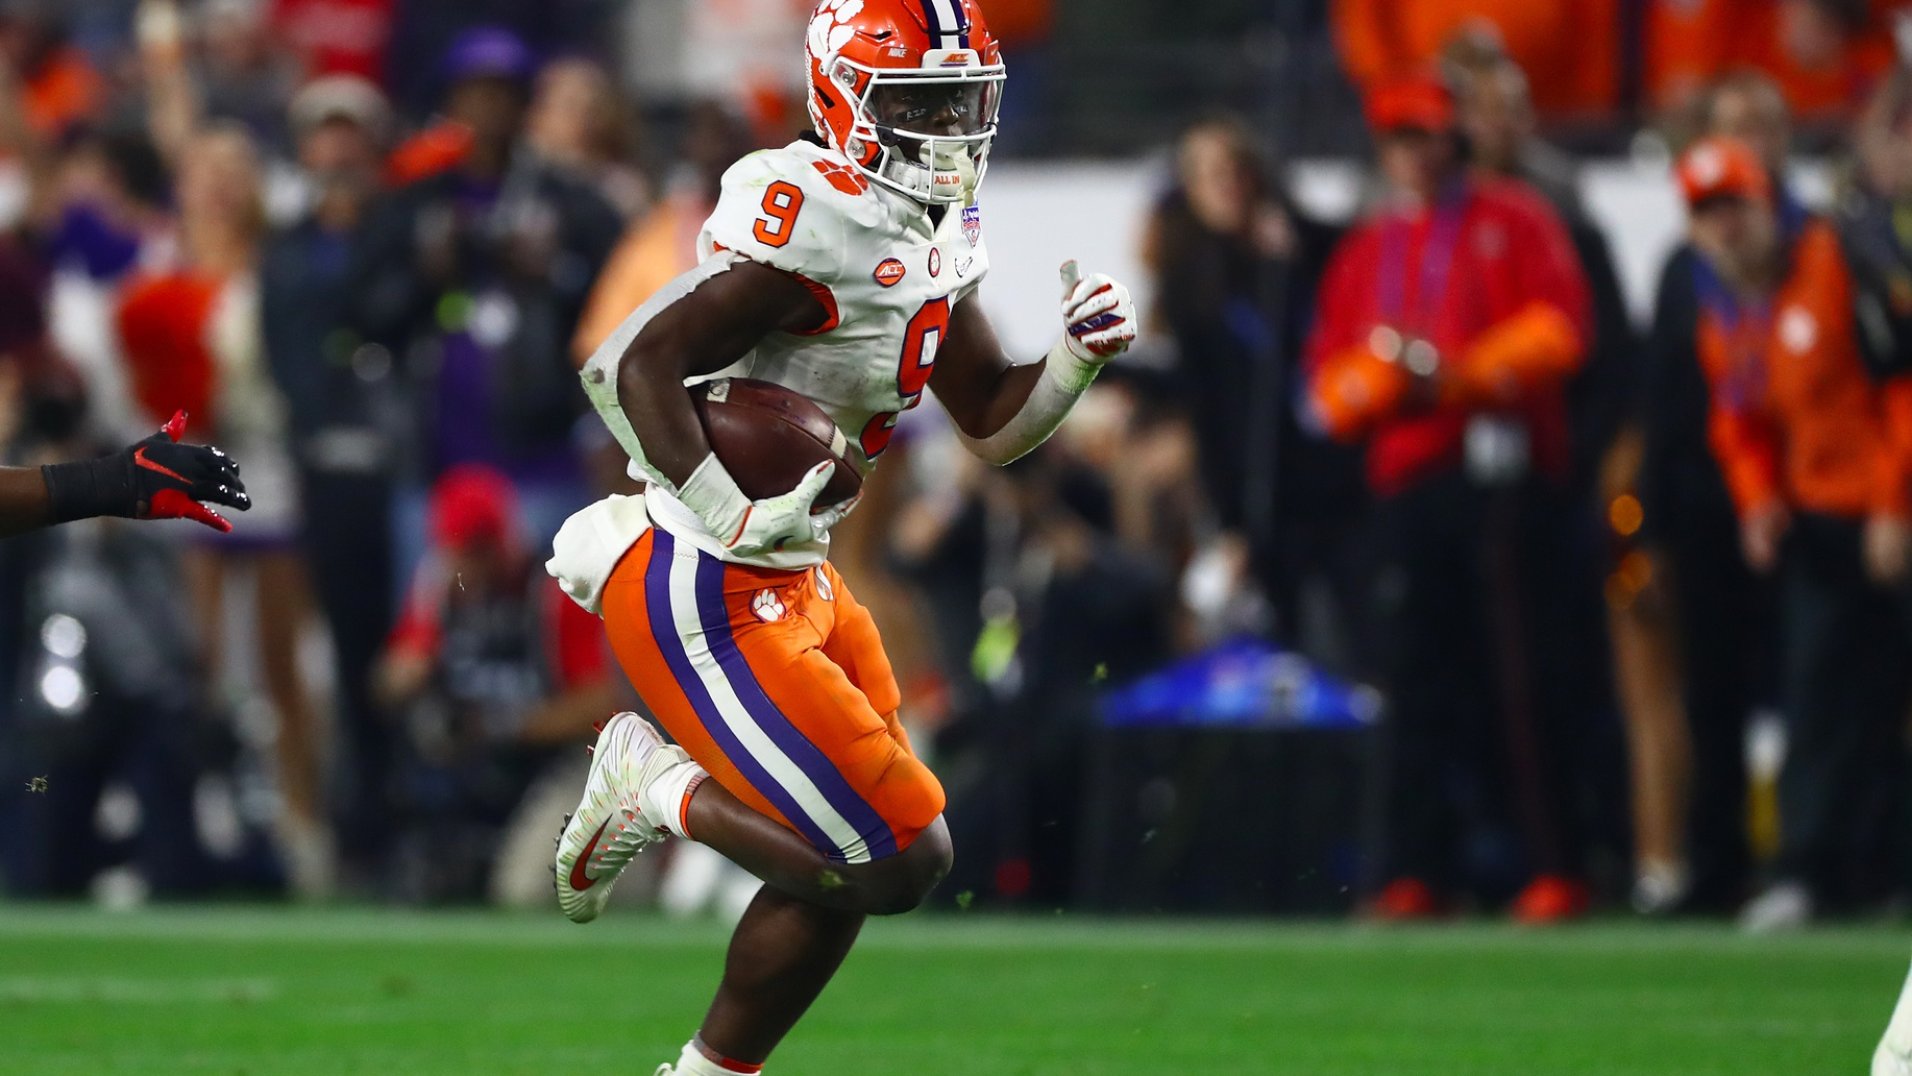 Top 25 prospects for the 2021 NFL Draft who chose to return to college